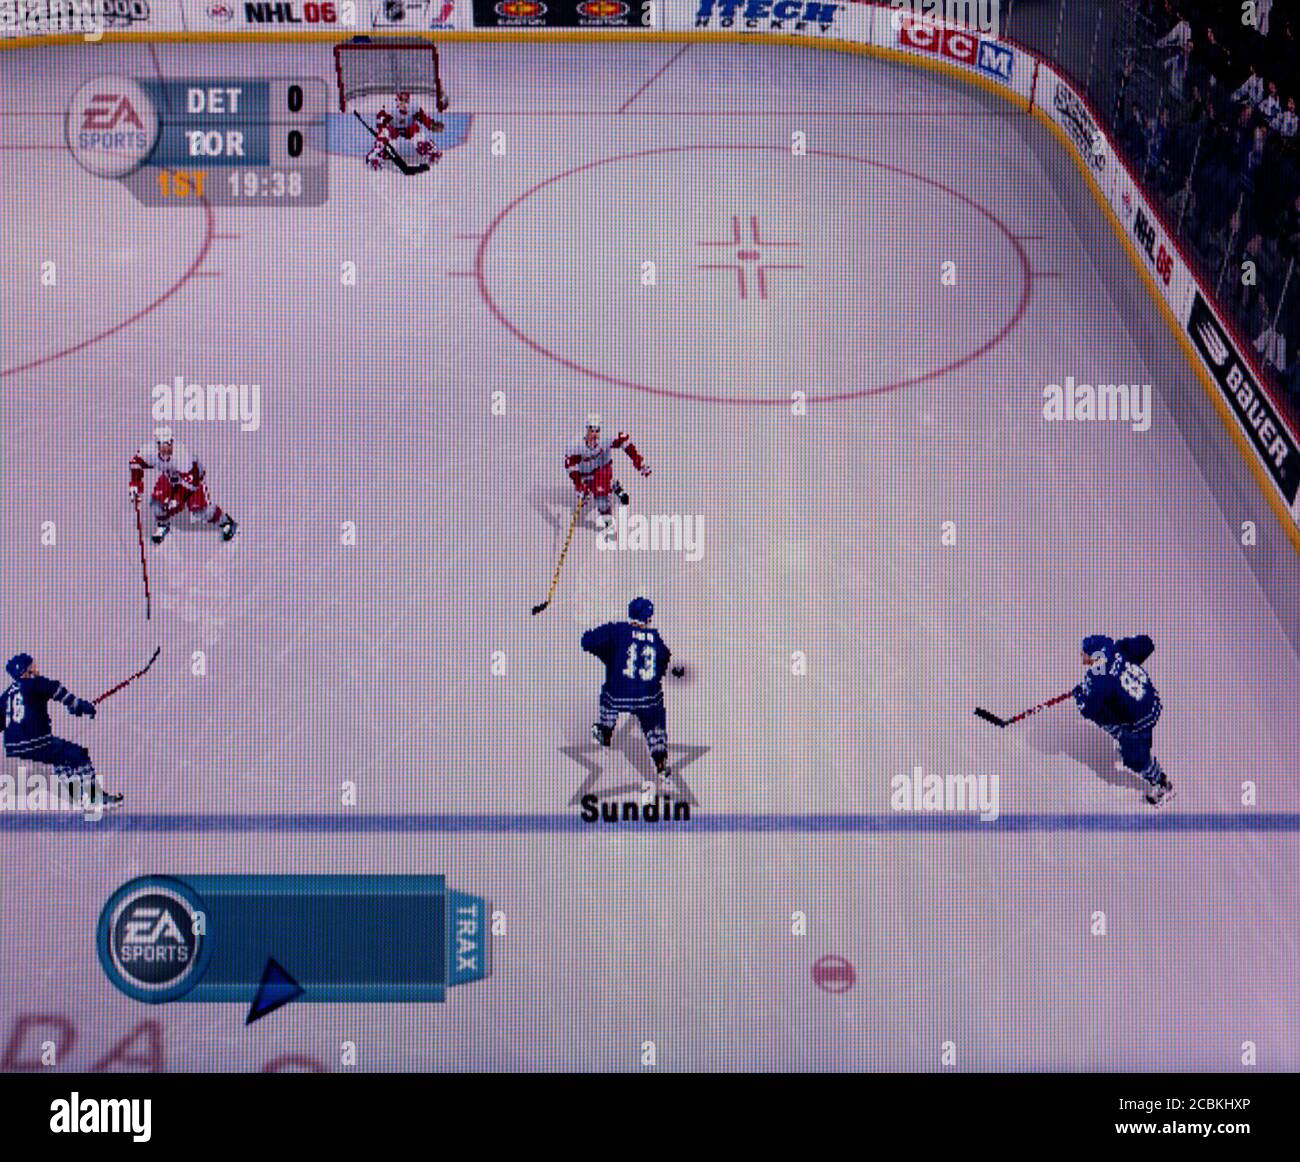 NHL 06 - Nintendo Gamecube Videogame - Editorial use only Stock Photo